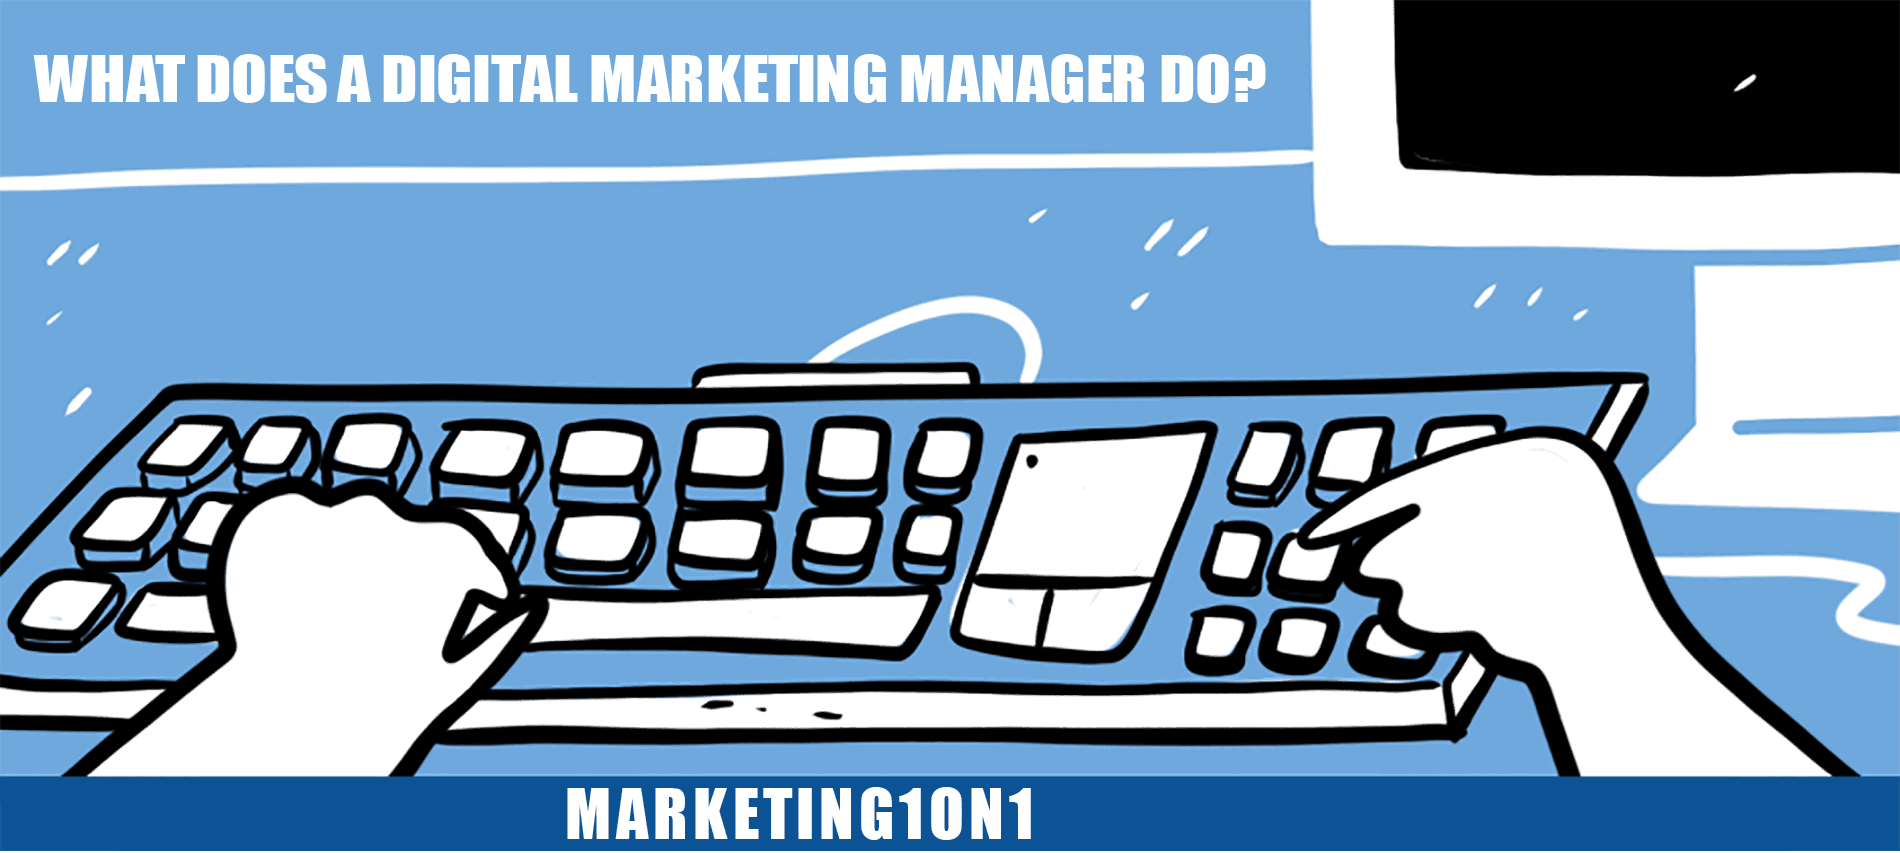 What does a digital marketing manager do?